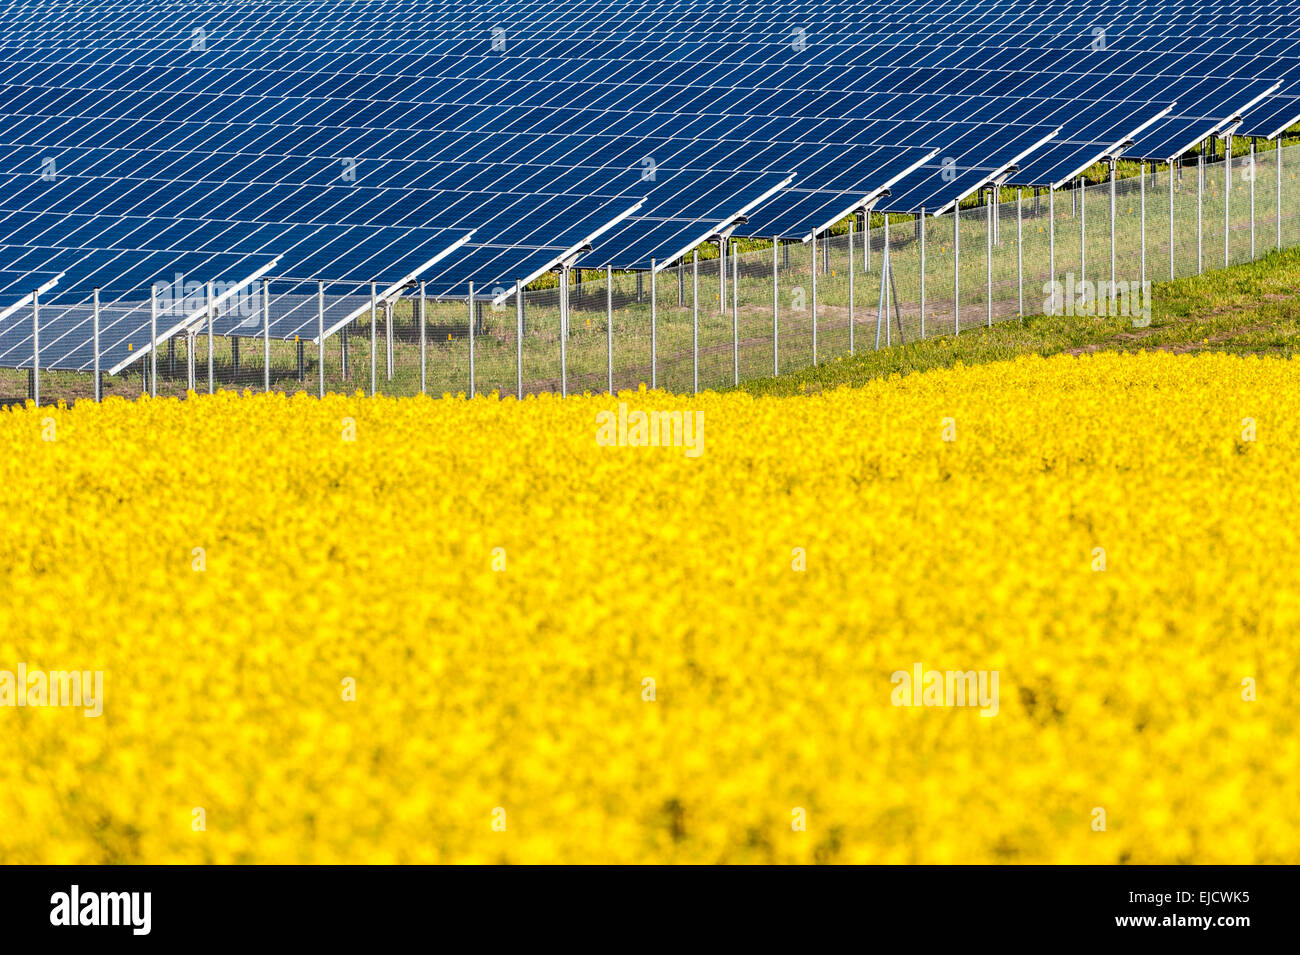 Solar panels in a rapeseed field Stock Photo